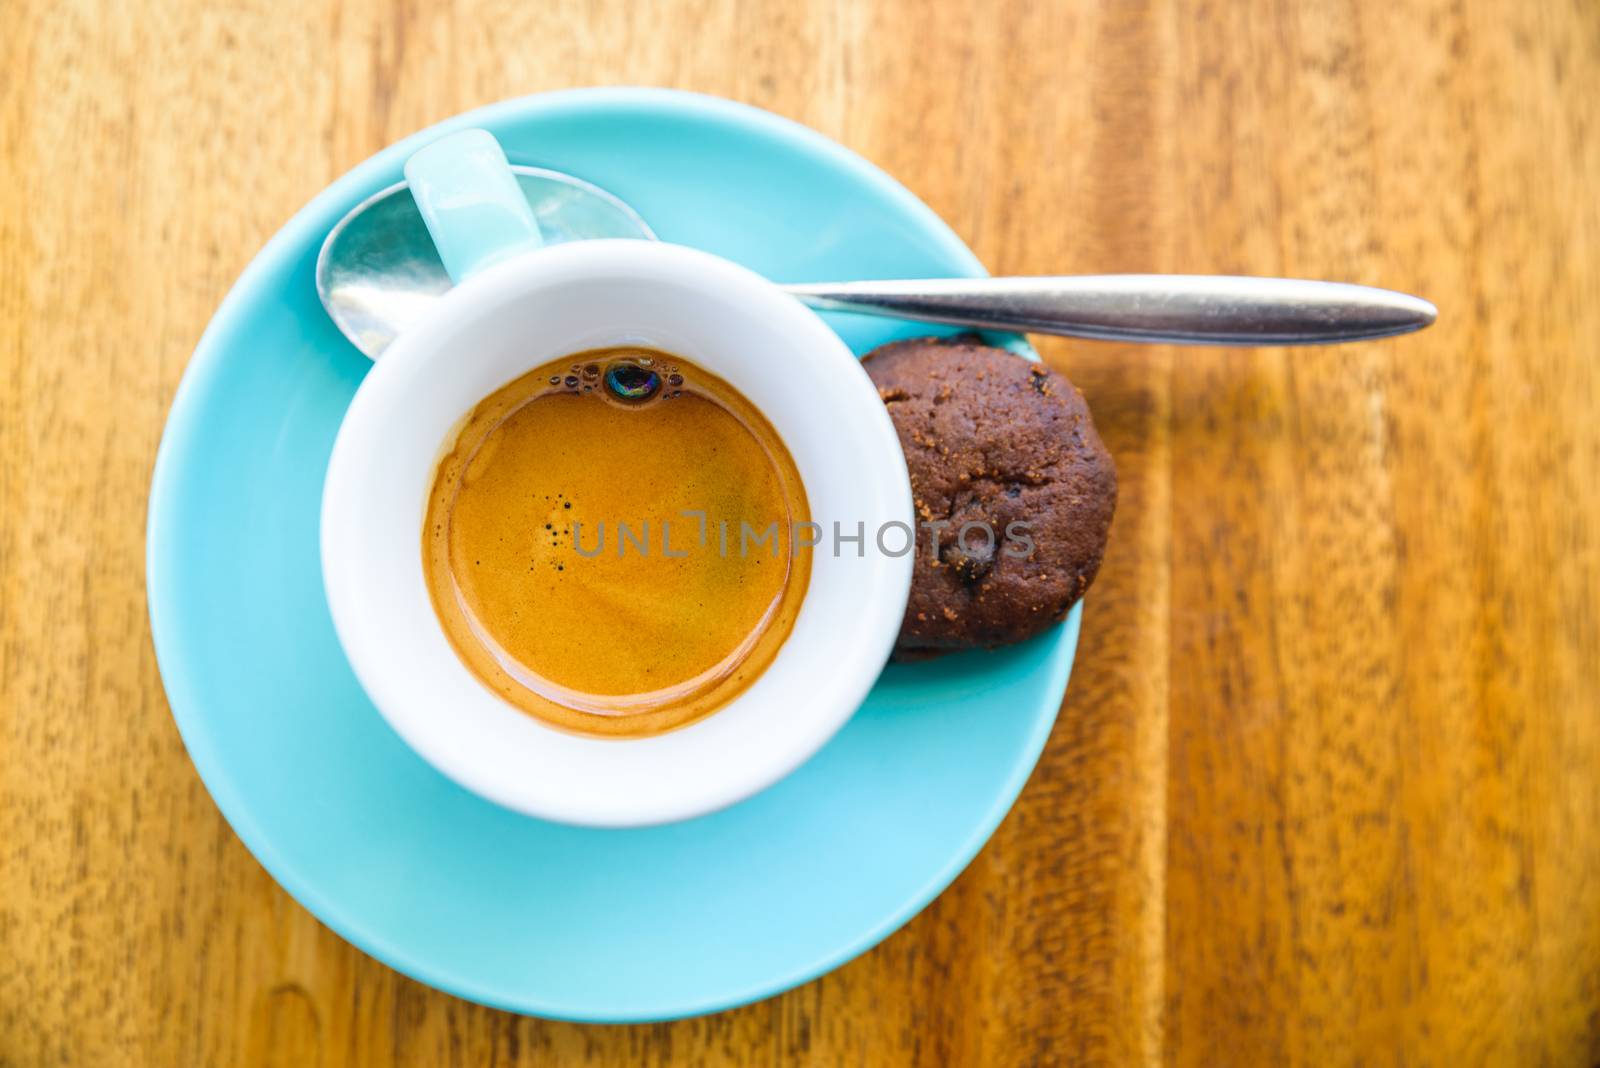 An espresso served in a turquoise cup by dutourdumonde